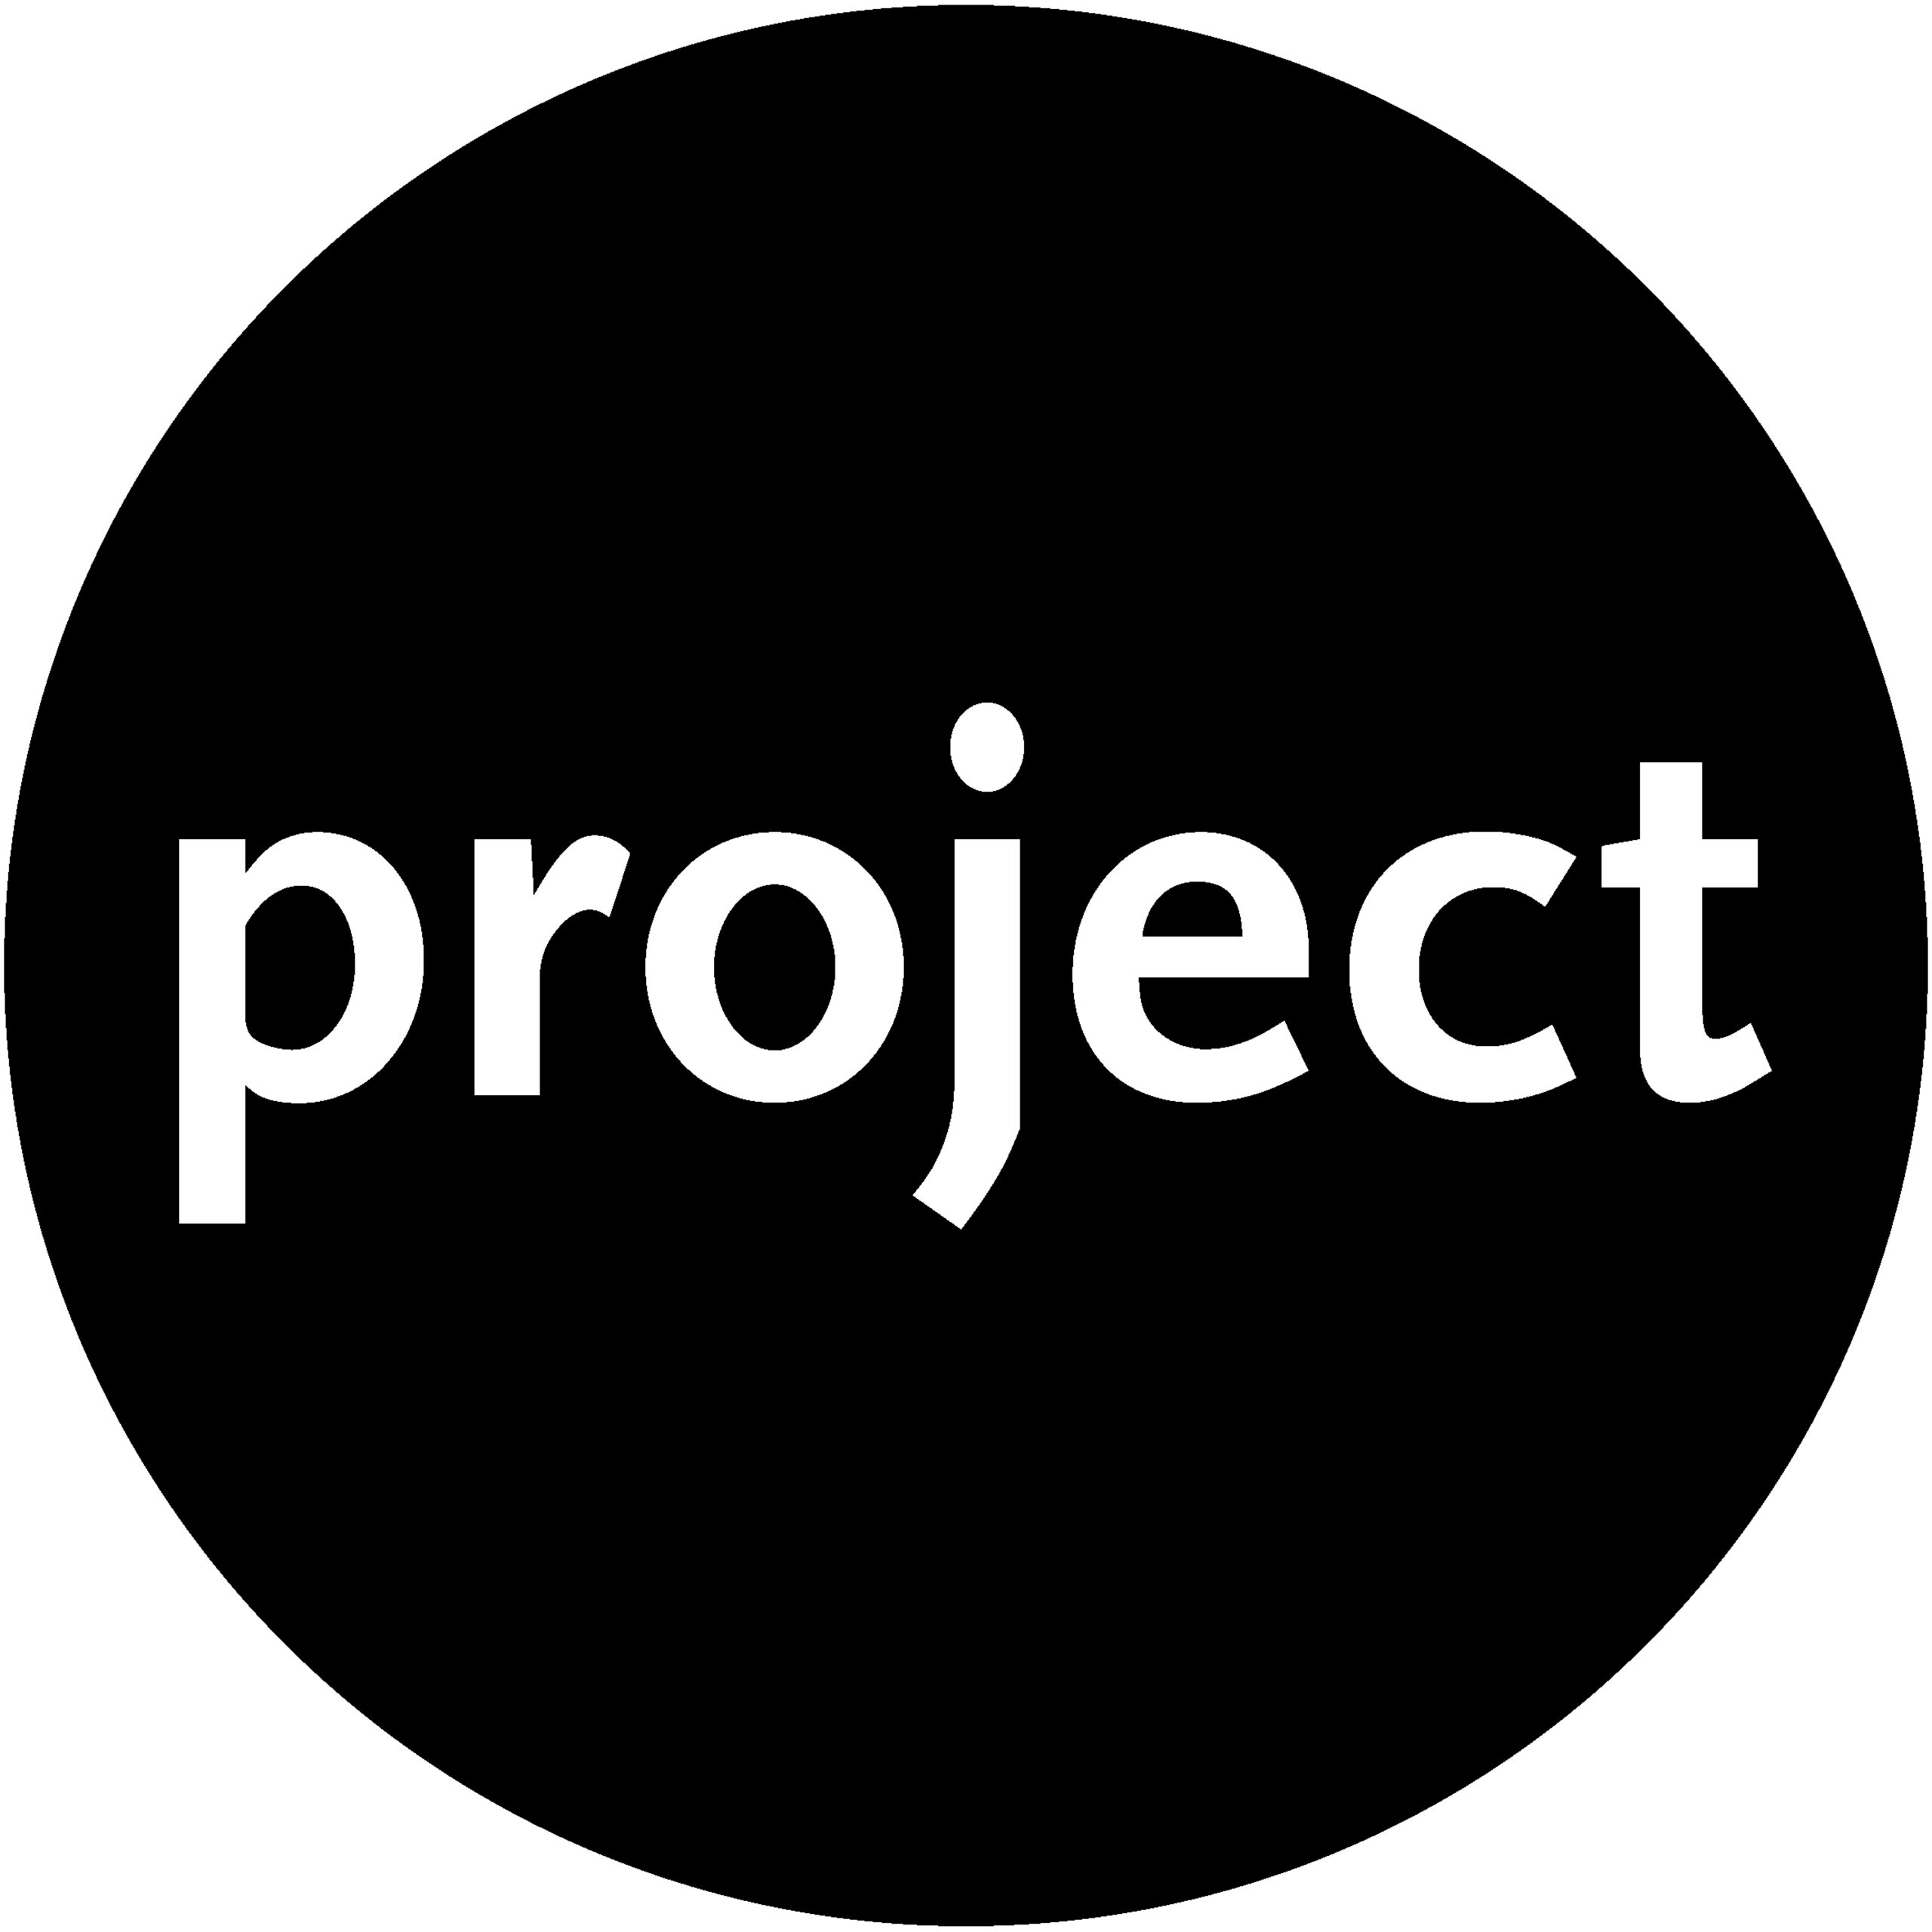 Logo image for Project Arts Centre. Inside a solid is the word 'project' in lower case white lettering